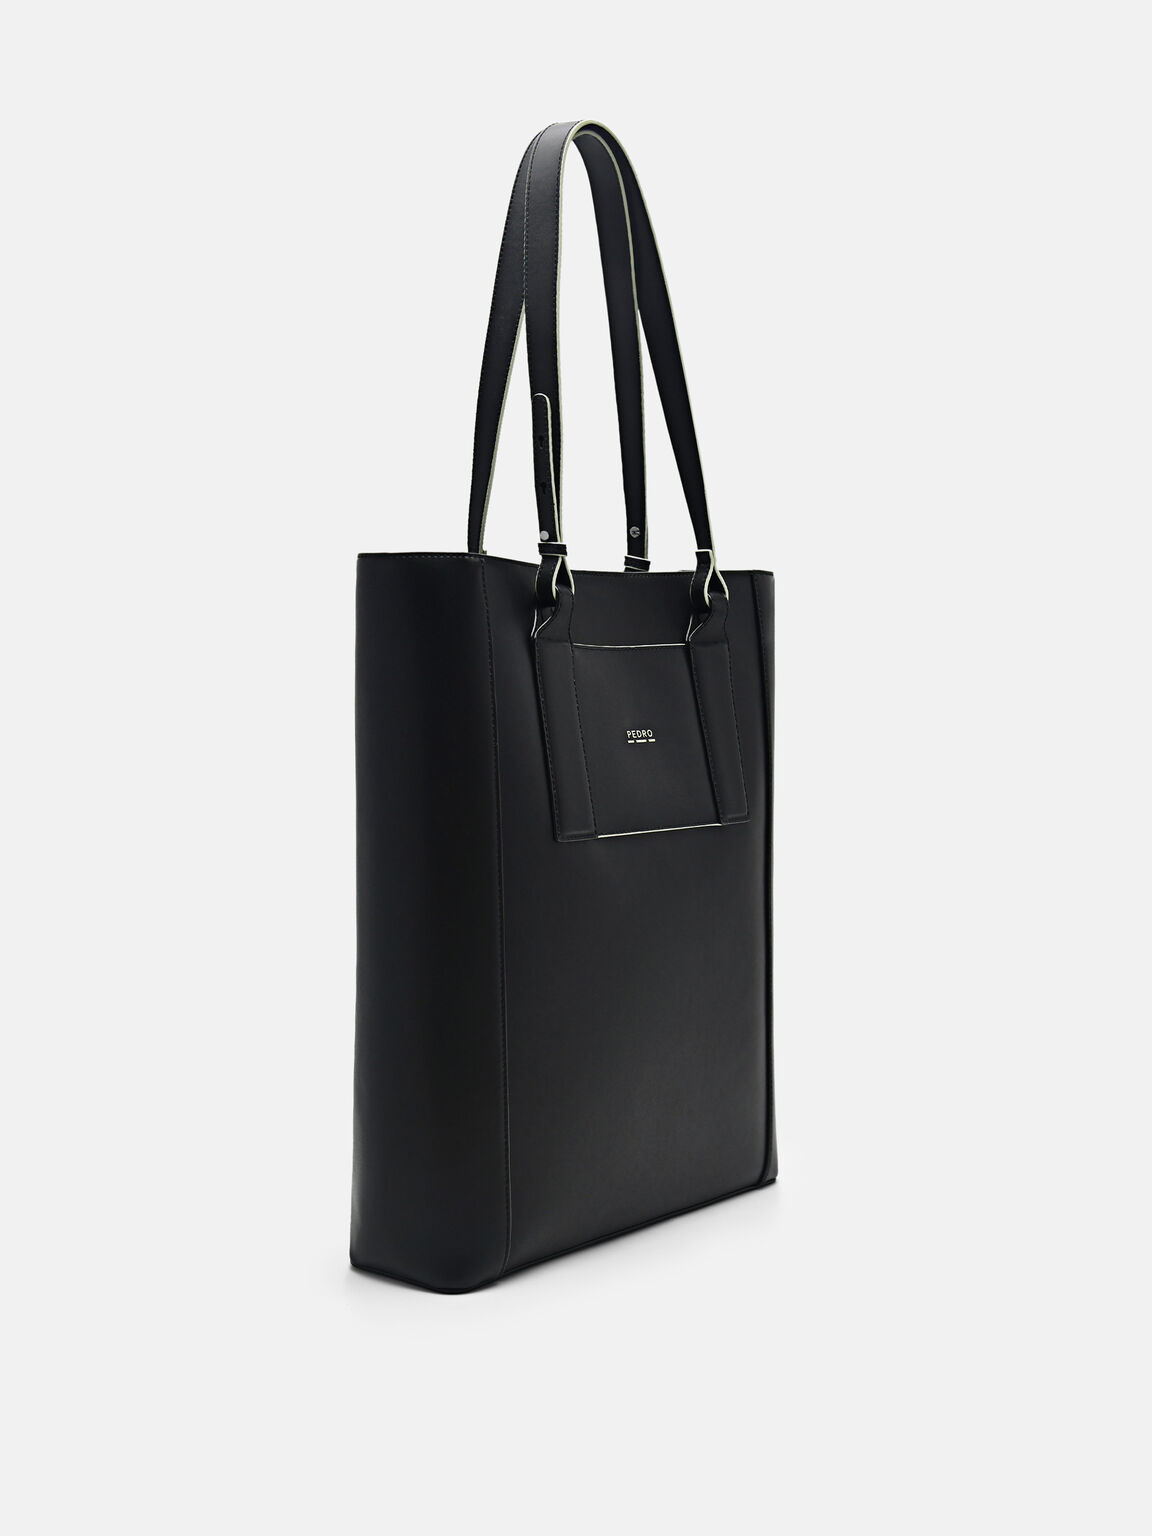 rePEDRO Recycled Leather Tote Bag, Black, hi-res